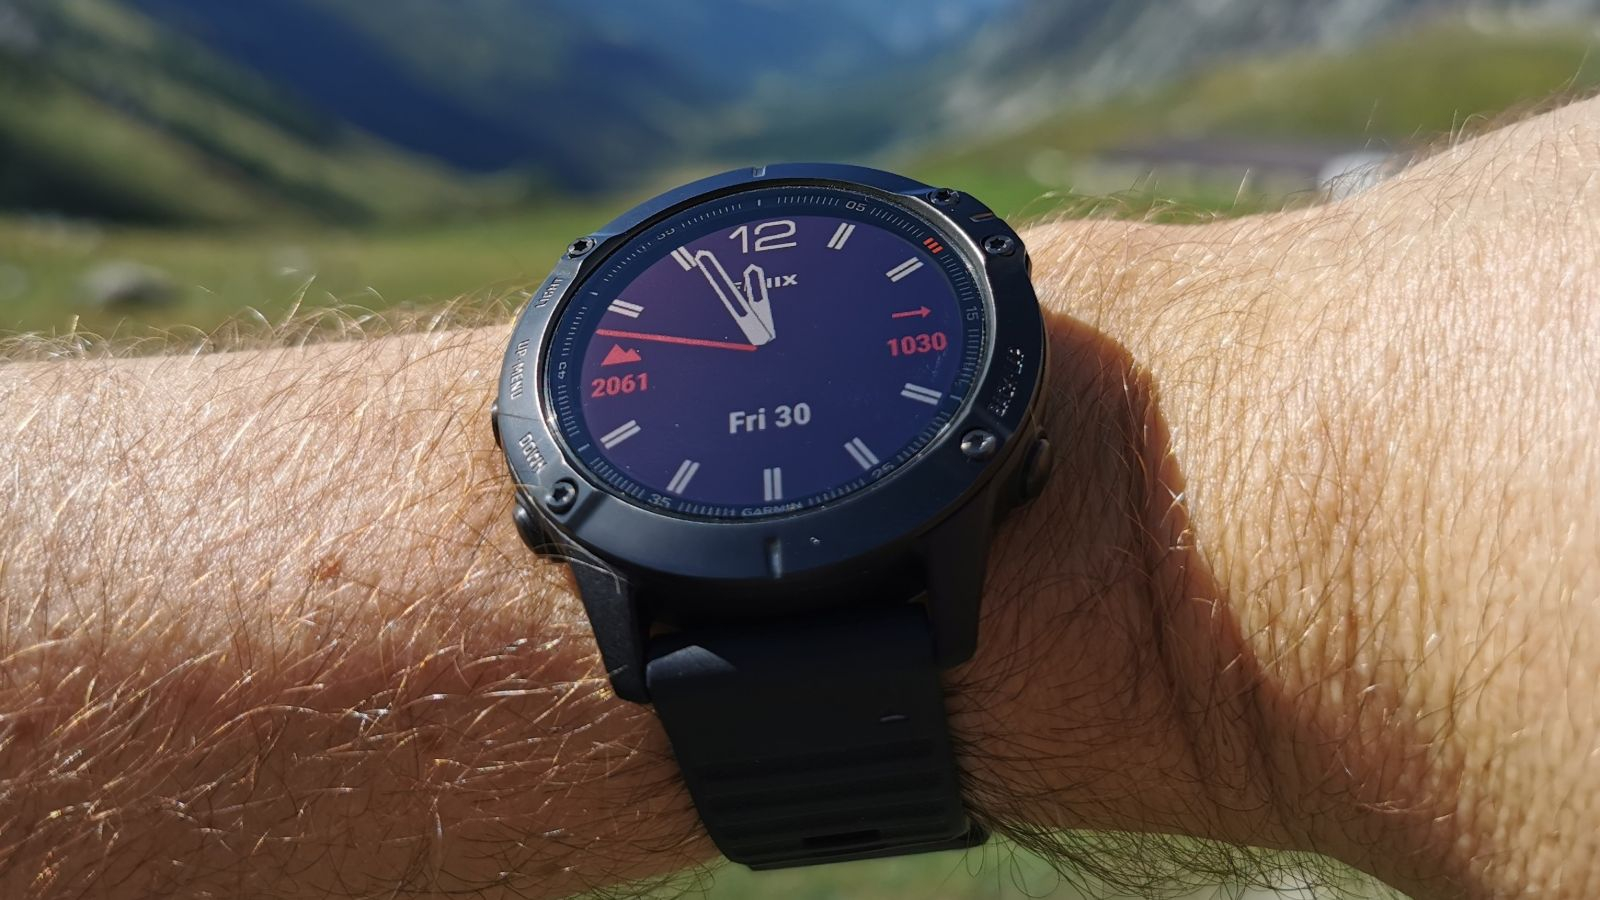 Hands-on with Garmin's high-end Fenix 5 multisport watches - CNET